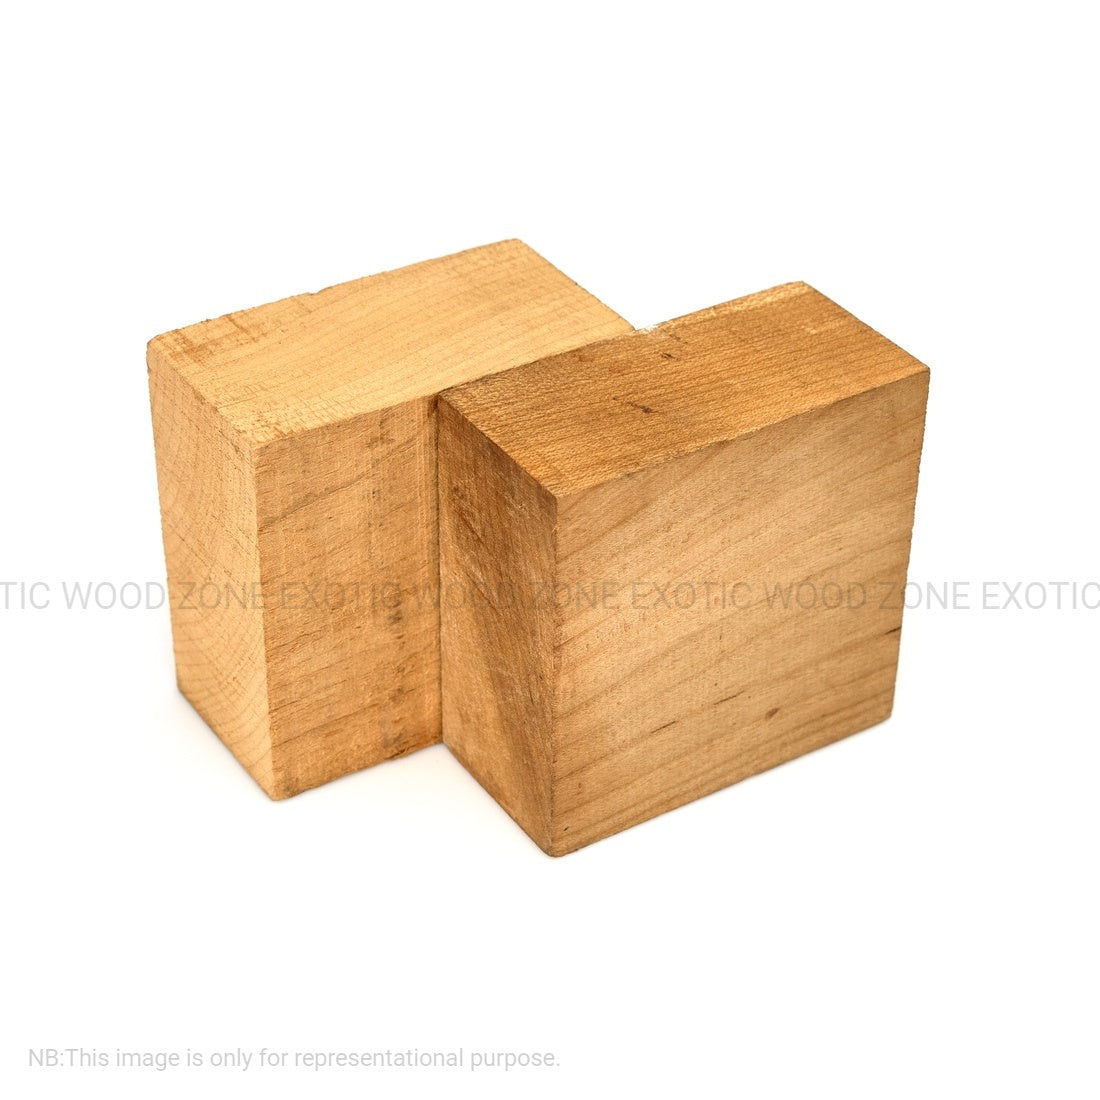 Pack of 10, Black Cherry Wood Bowl Blanks 4&quot; x 4&quot; x 2&quot; - Exotic Wood Zone - Buy online Across USA 